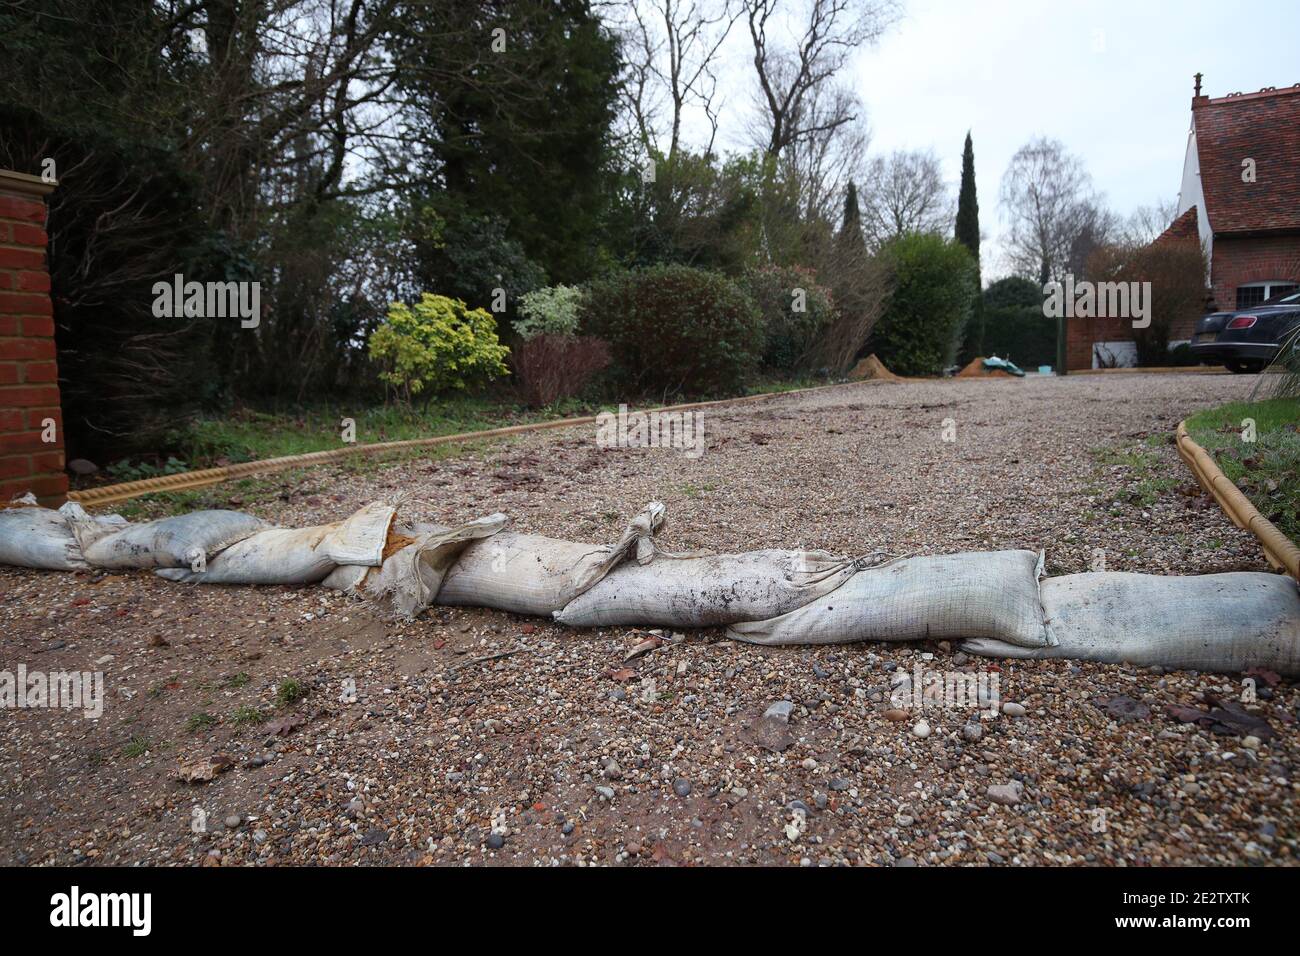 Sandbags are laid across a driveway after a nearby road flooded when the River Chelmer burst its banks in the village of Great Easton, Dunmow. Flood warnings were issued to large parts of England on Friday following heavy rainfall. Stock Photo